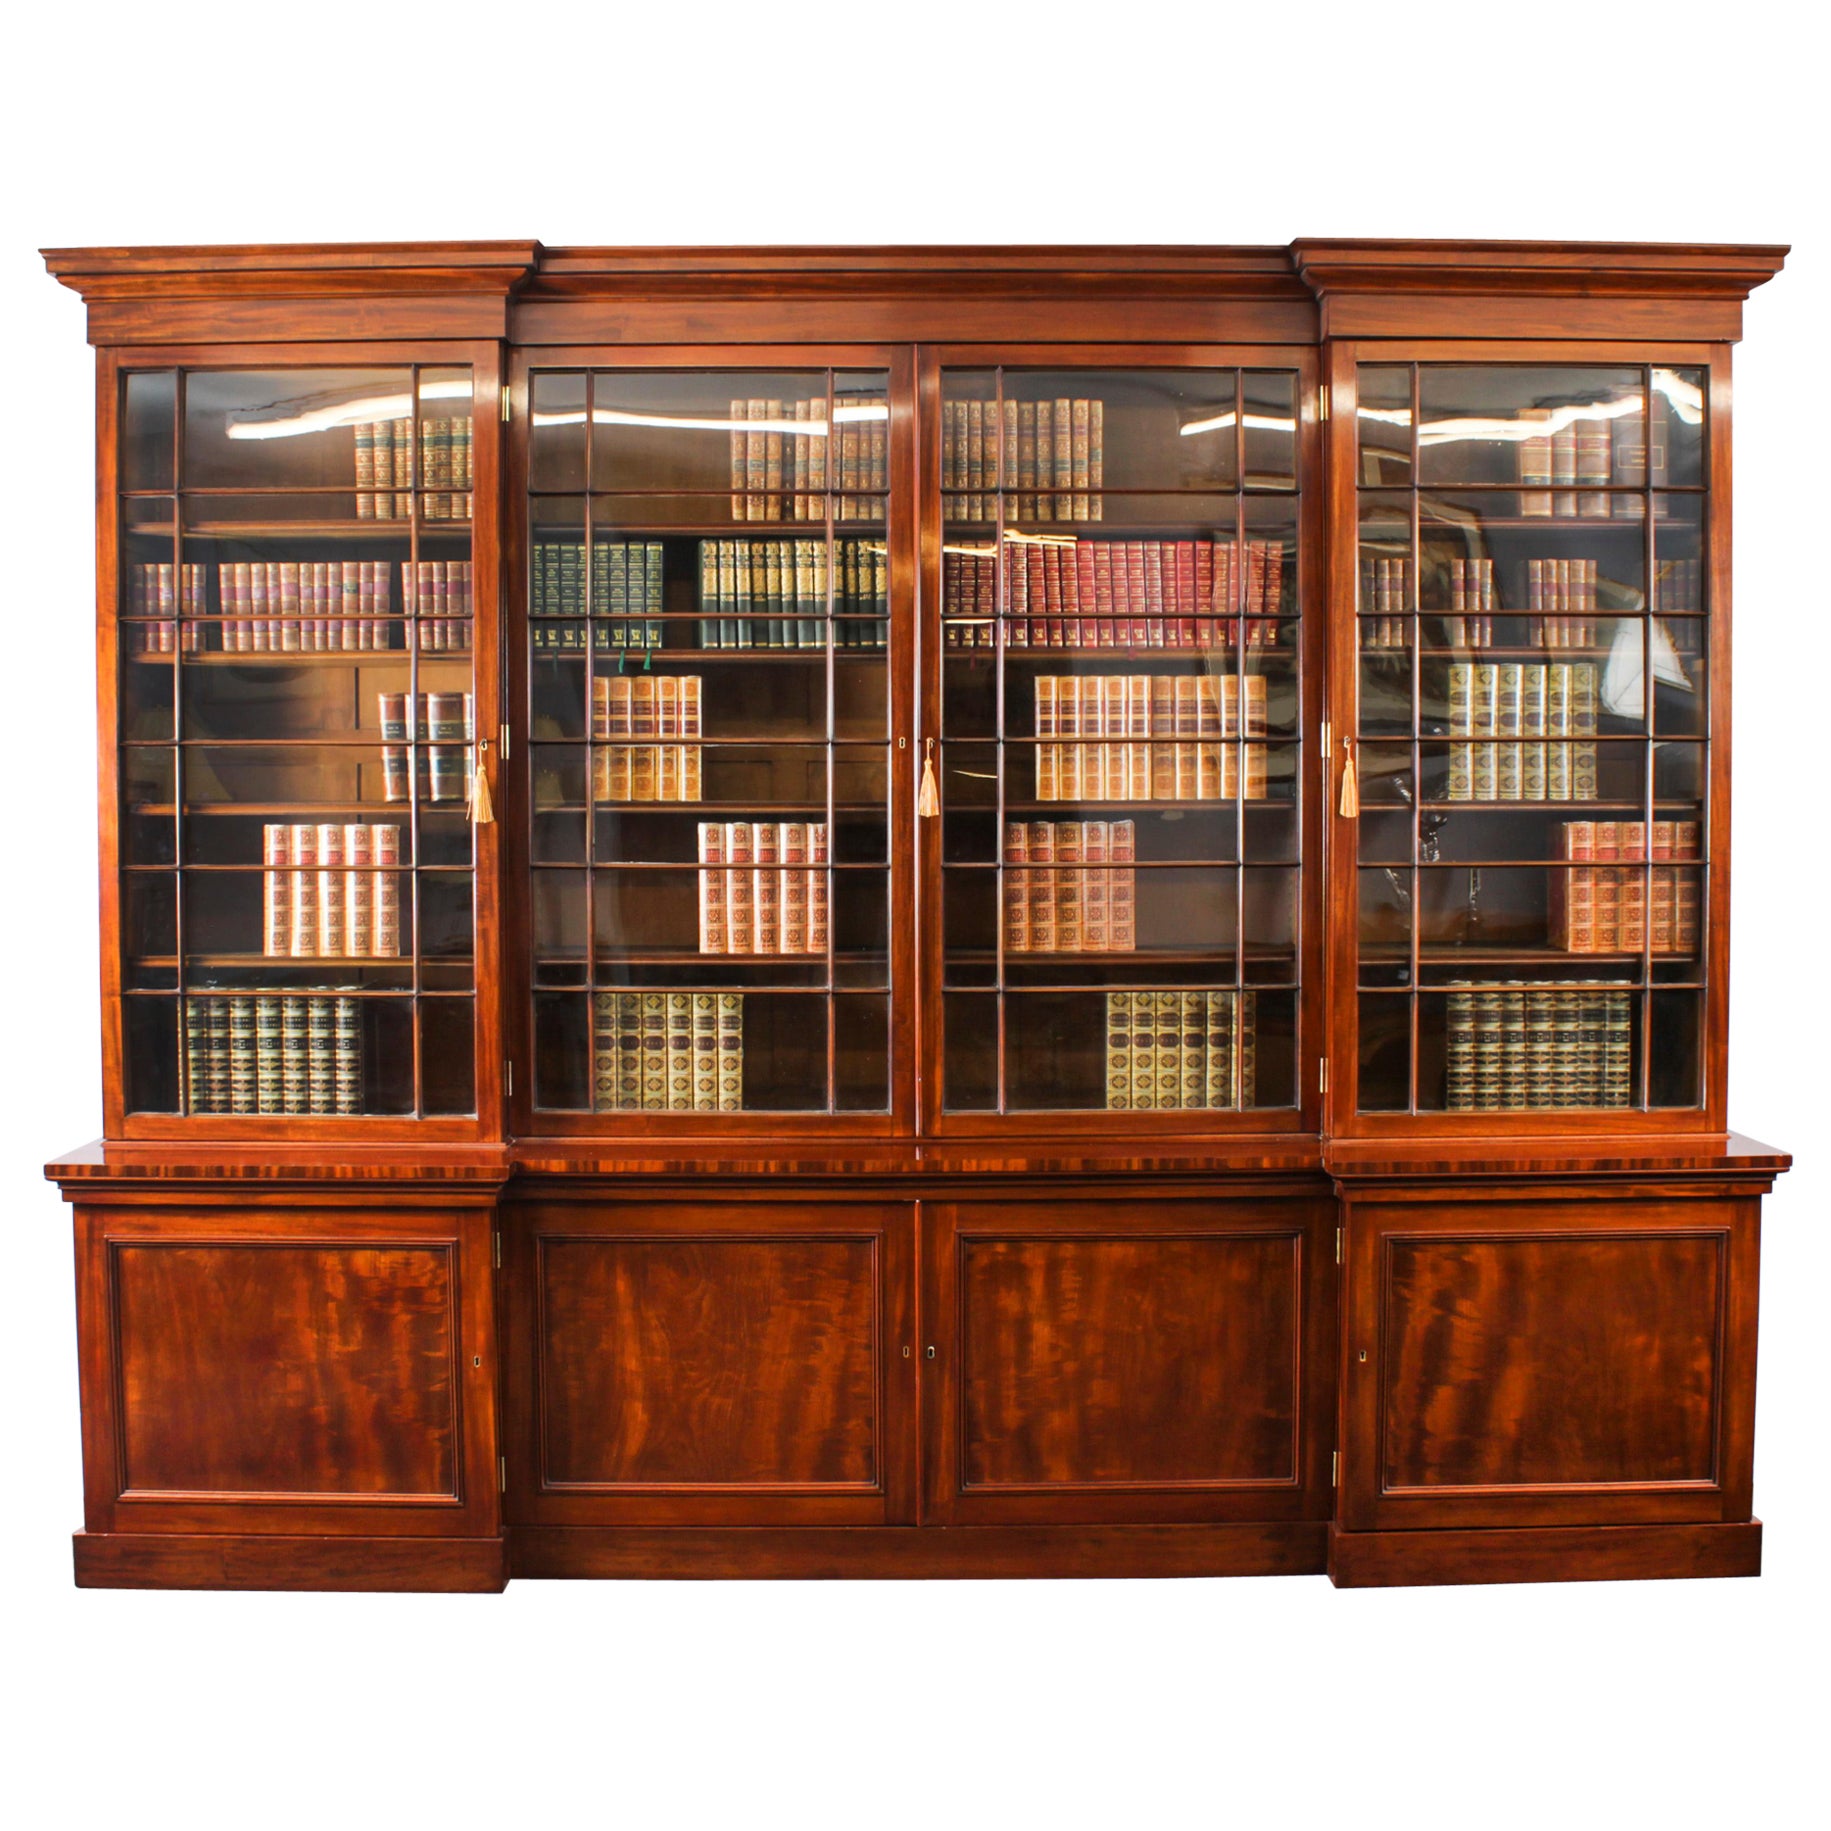 Antique English William IV Flame Mahogany Library Breakfront Bookcase 19th C